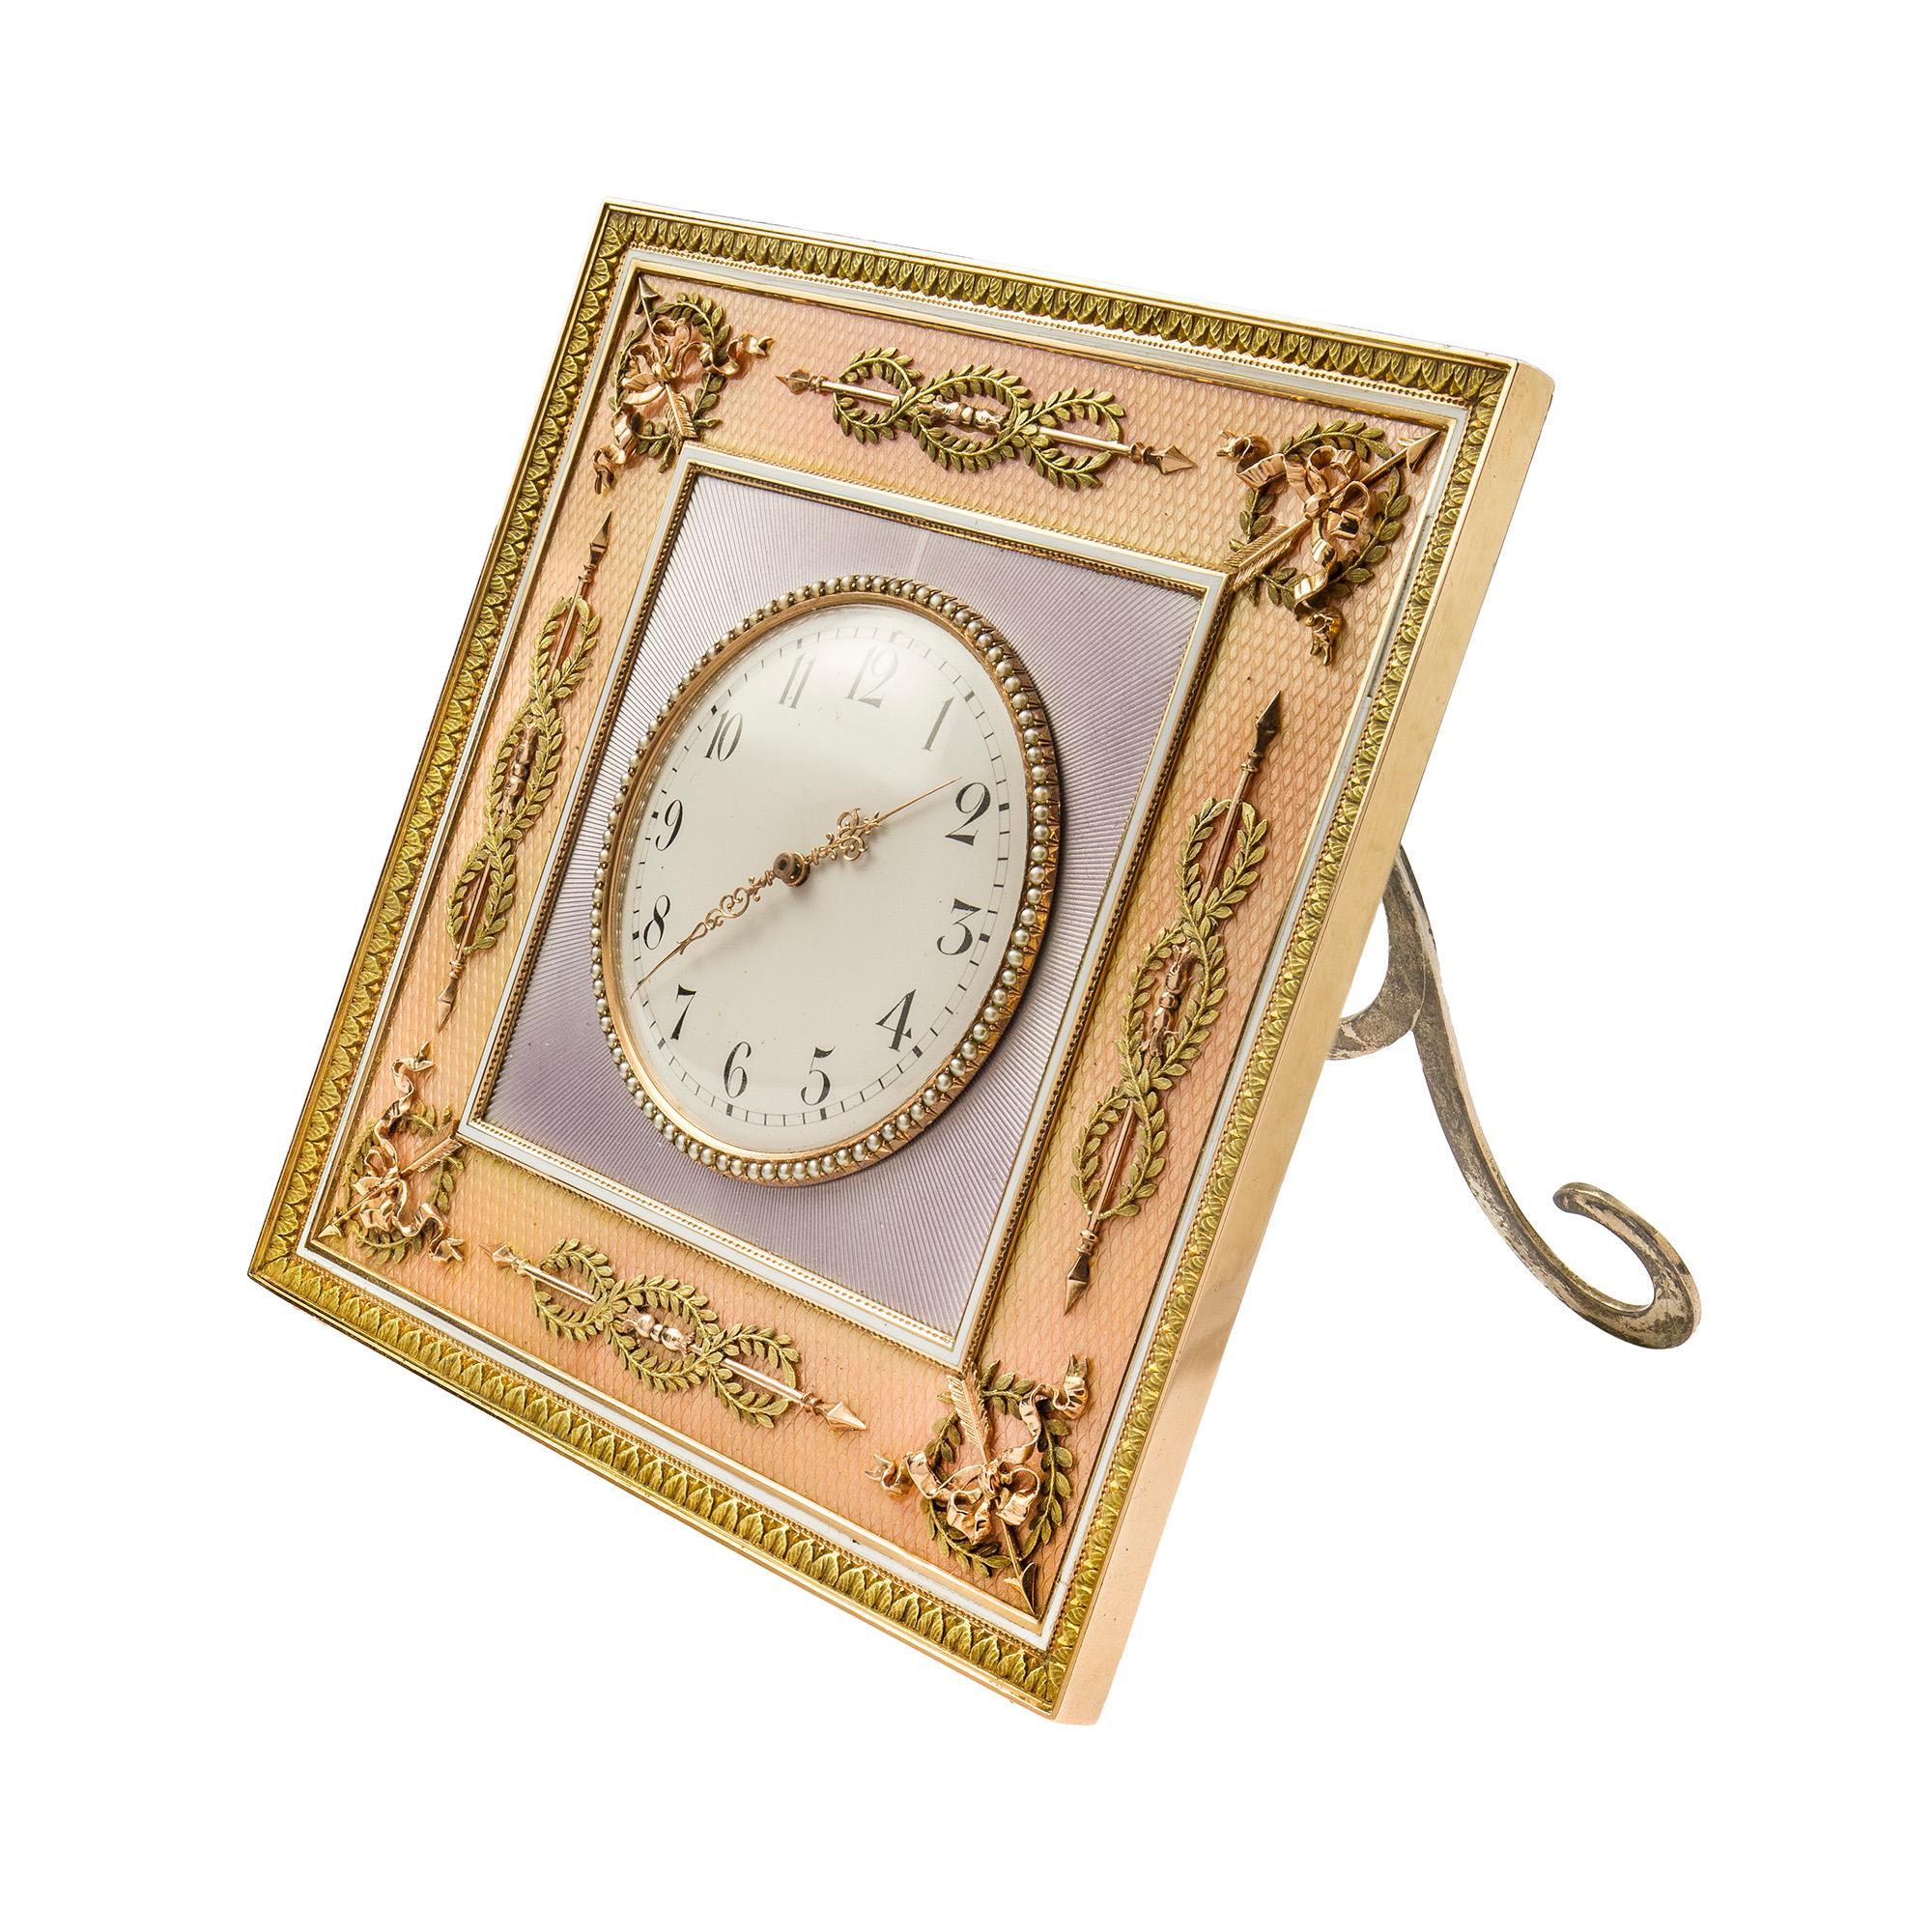 An Important Fabergé two-colour gold-mounted guilloche enamel desk clock, marked Fabergé, square, with circular seed-pearl bezel on lilac sunburst guilloché ground, the border enamelled in translucent salmon pink over a moiré guilloché ground, all